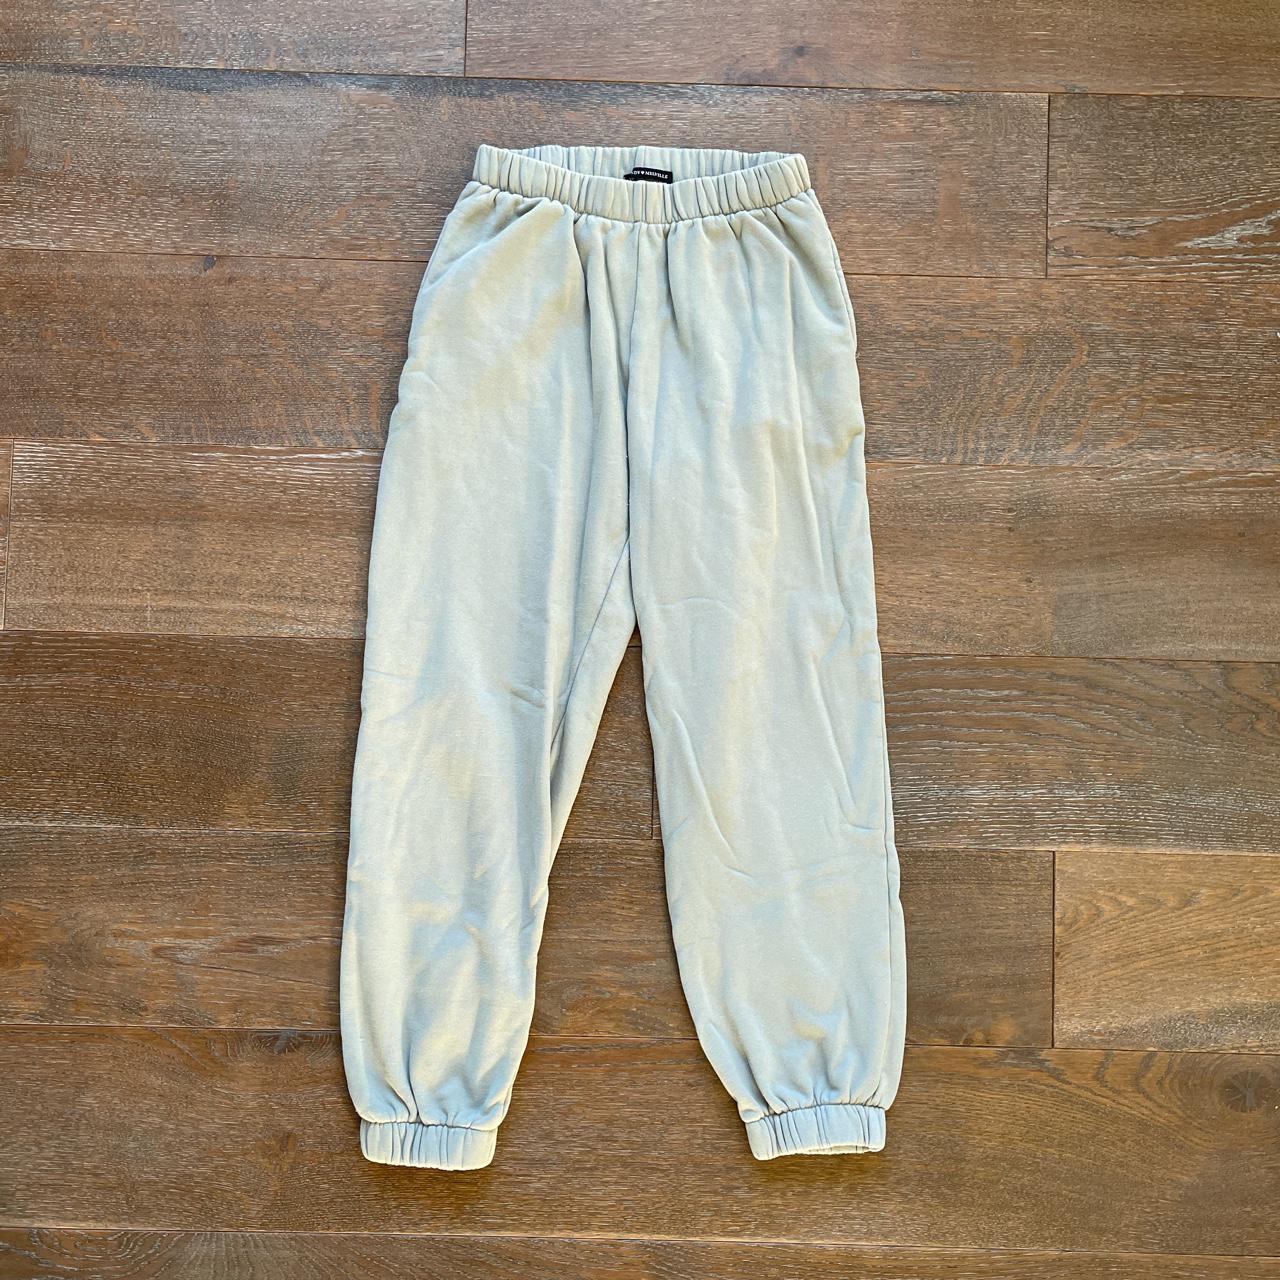 New and used Brandy Melville Women's Pants for sale